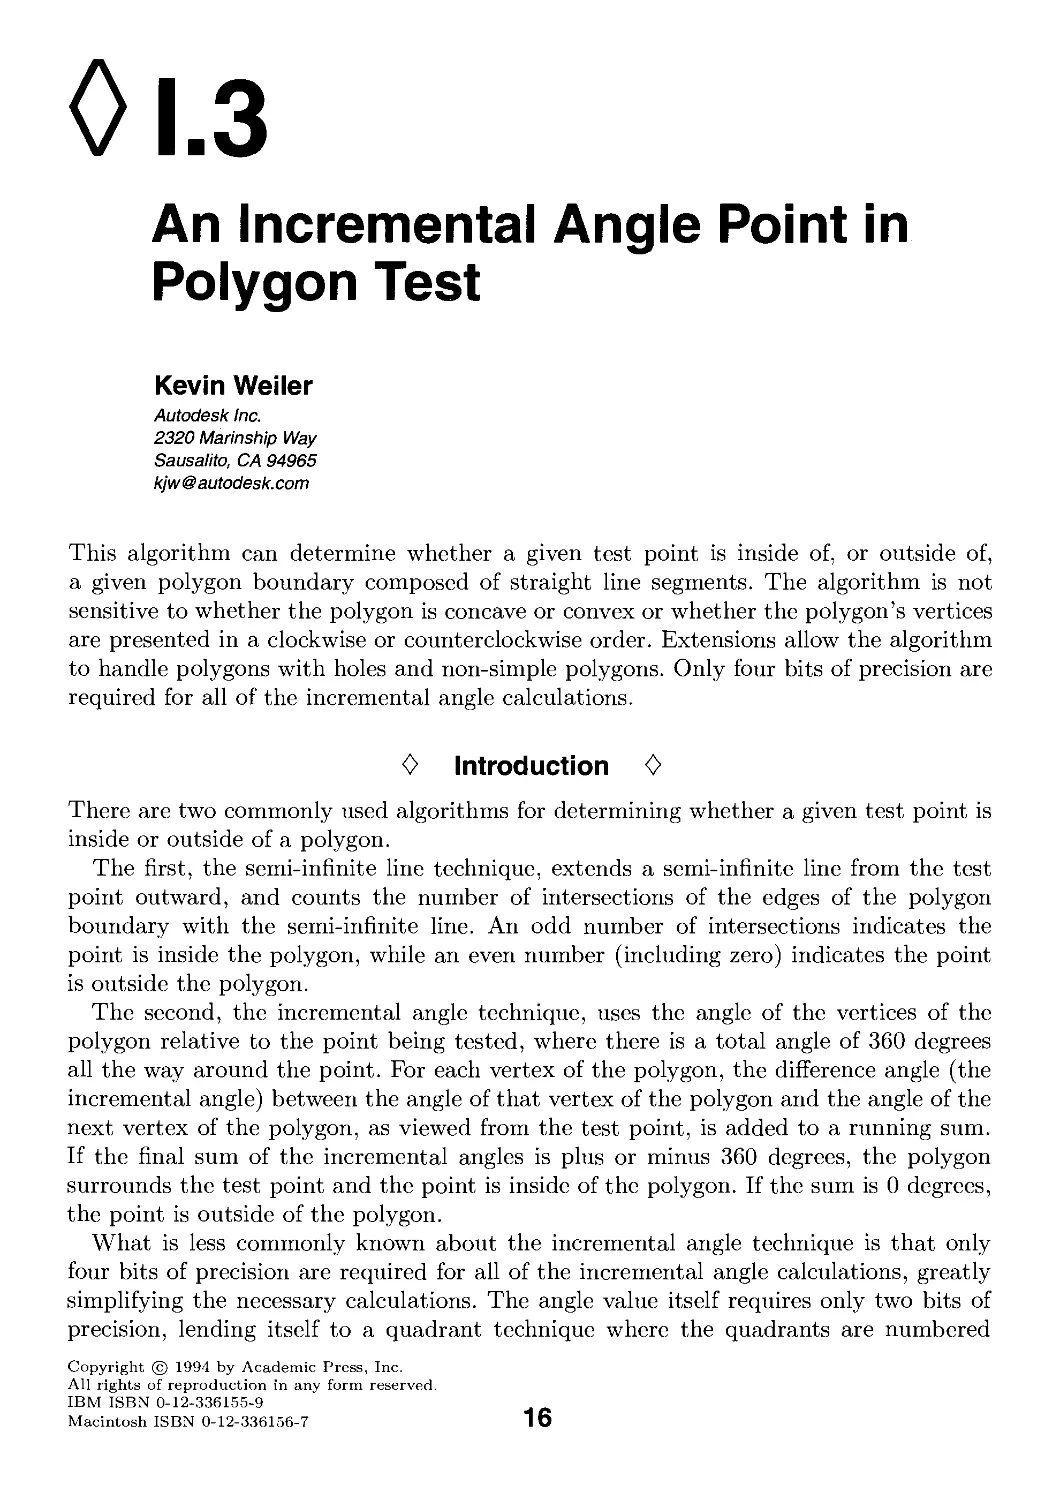 I.3. An Incremental Angle Point in Polygon Test by Kevin Weiler